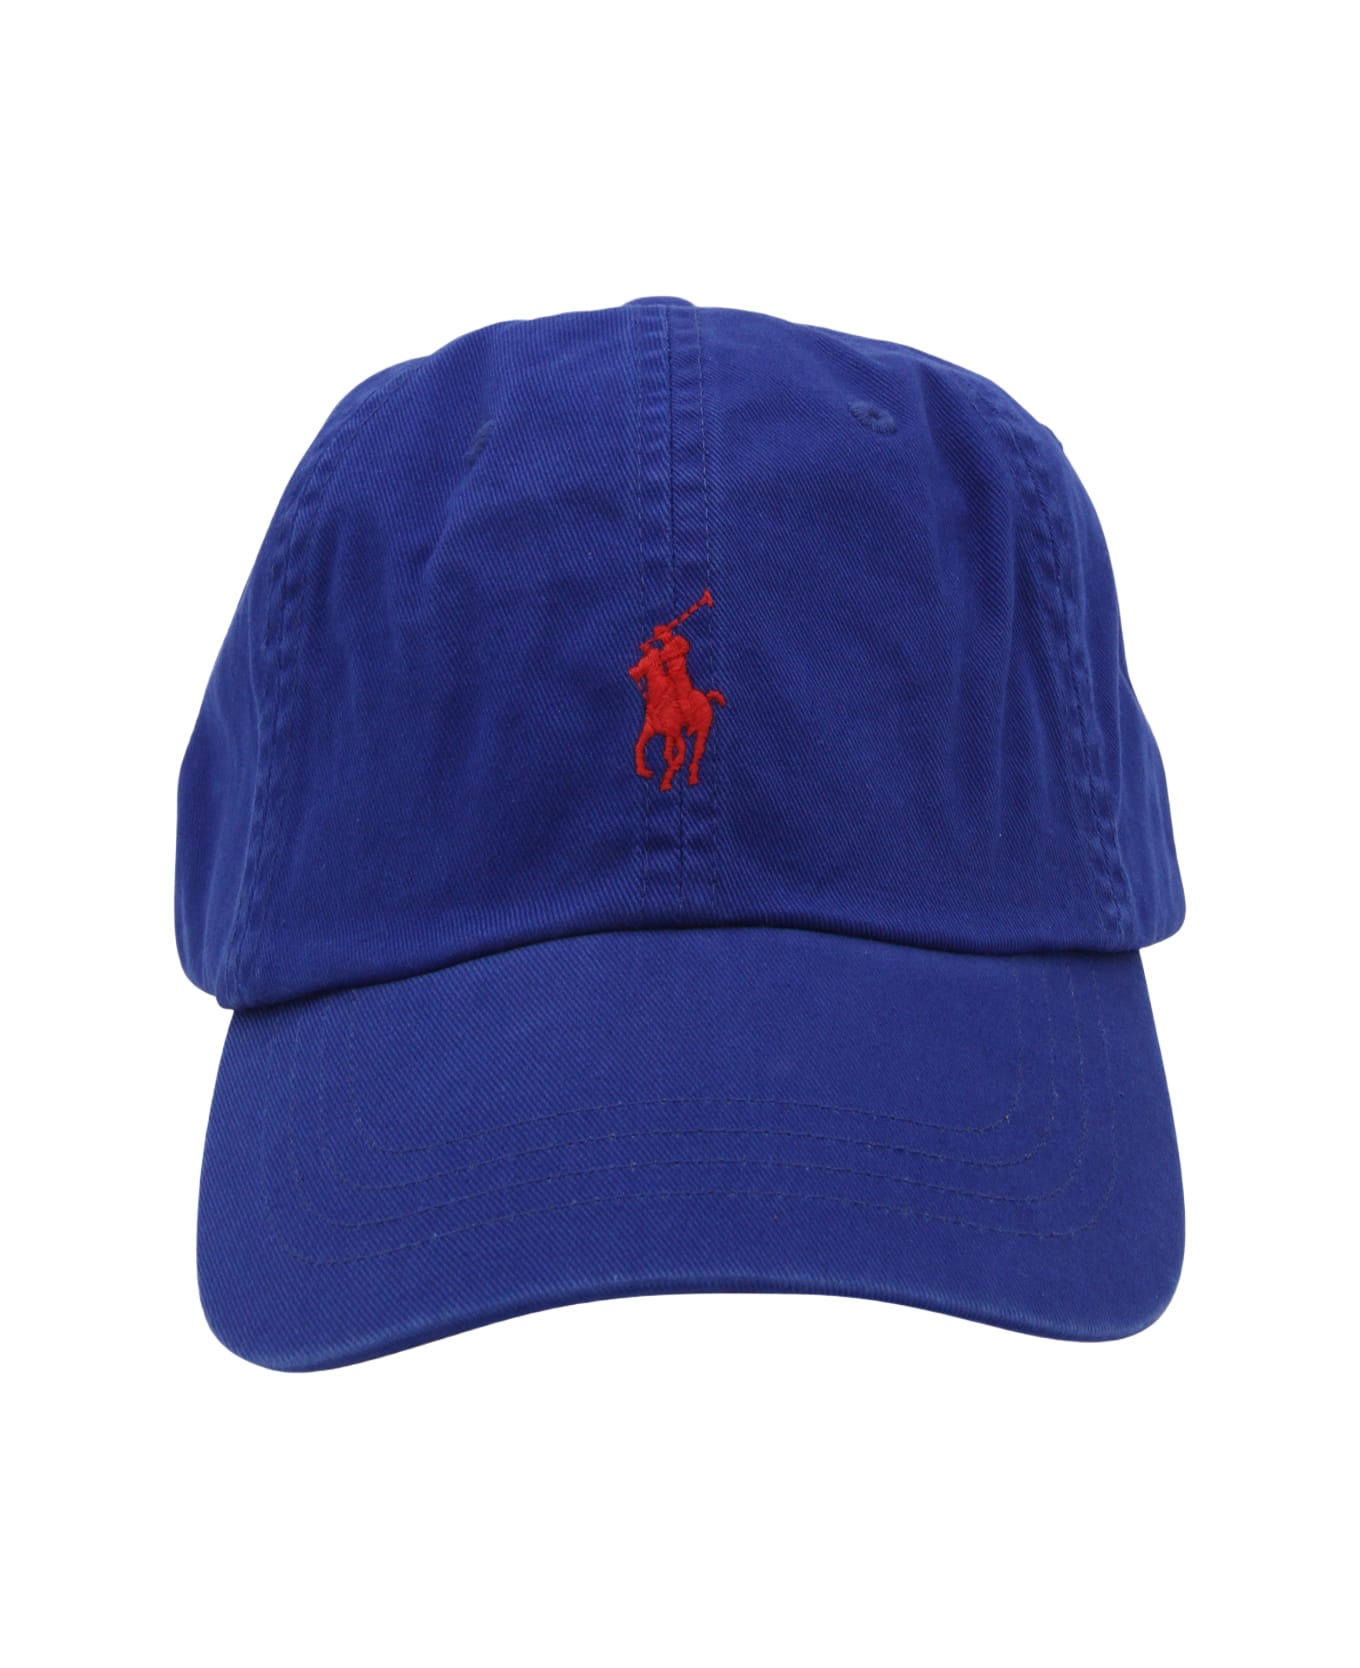 Polo Ralph Lauren Royal Blue And Red Cotton Baseball Cap - HERITAGE ROYAL